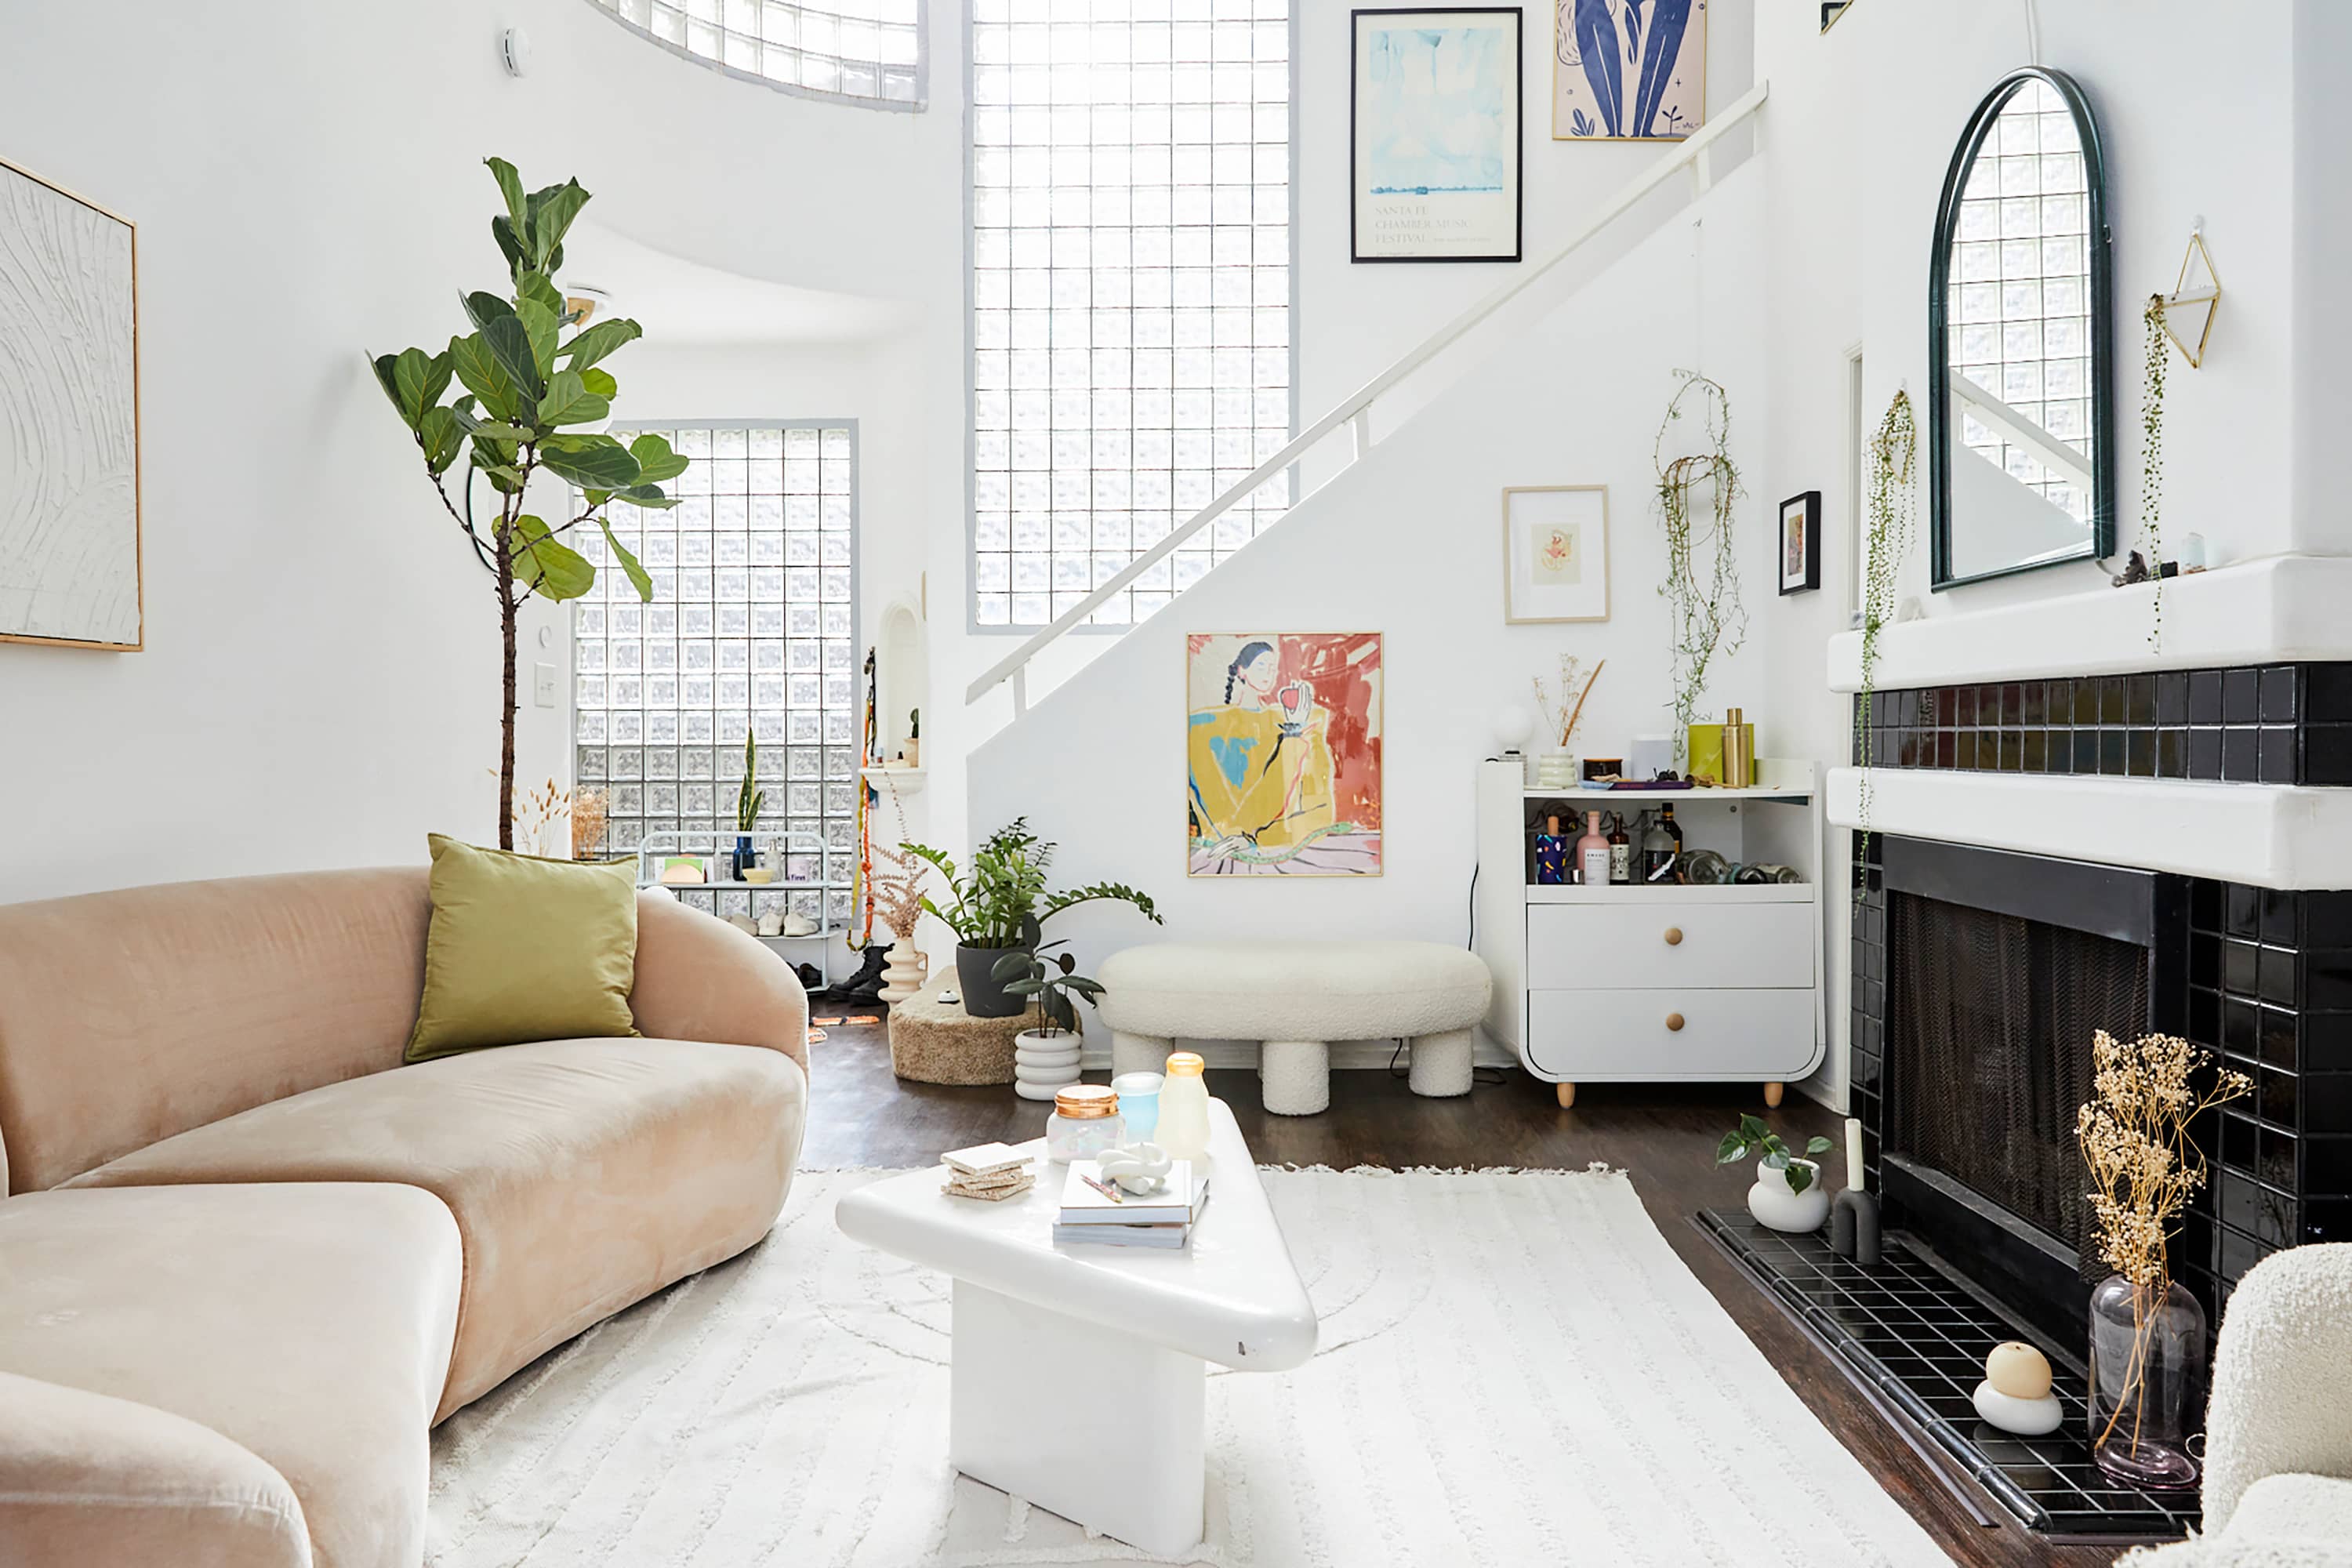 27 of Our Favorite Modern Home Decor Stores (That Aren't IKEA